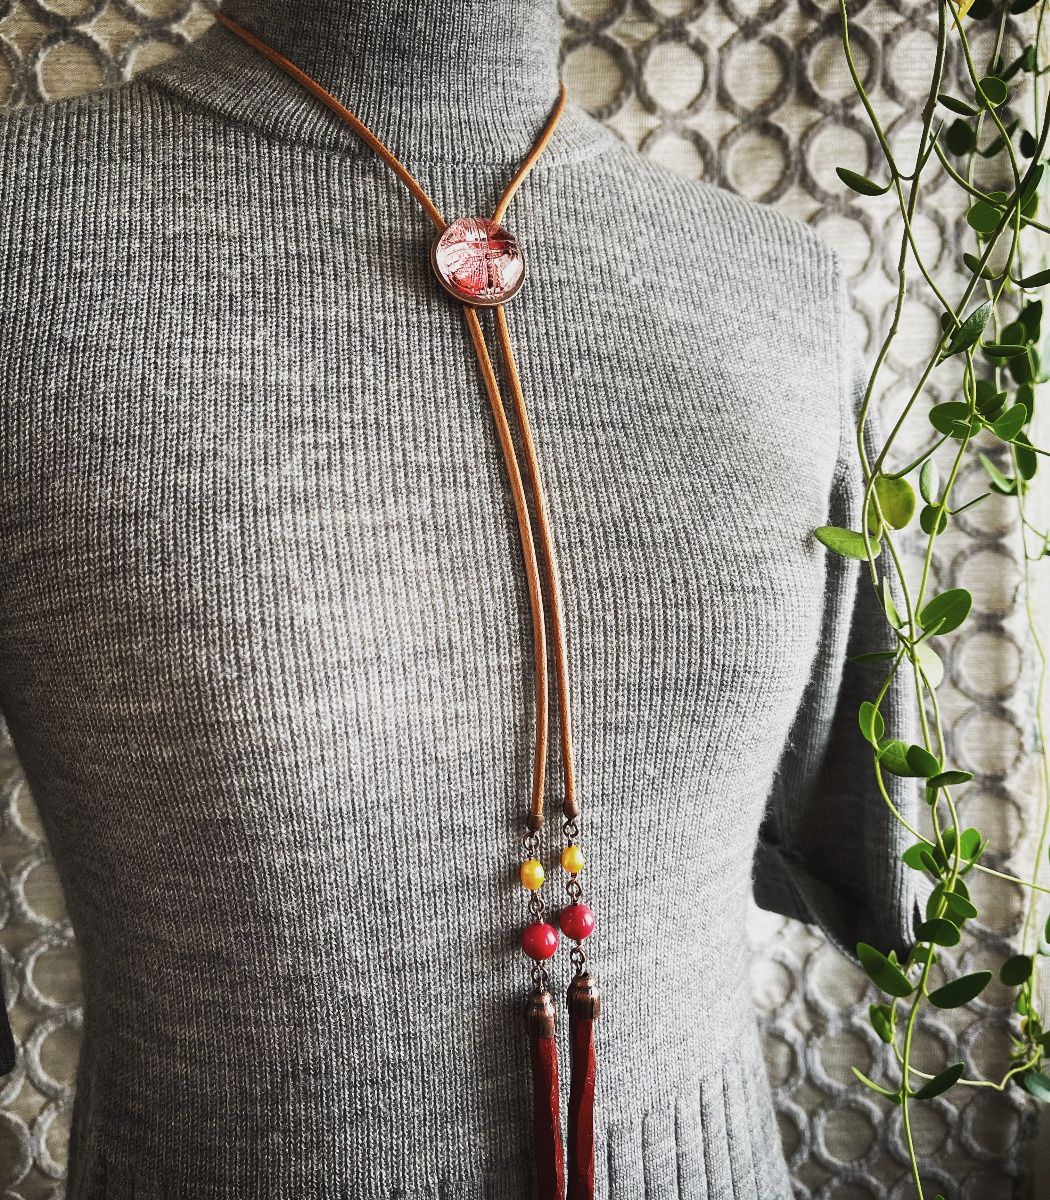 Leather Straps Bolo Tie Red Coral Long Necklace TAMARUSAN